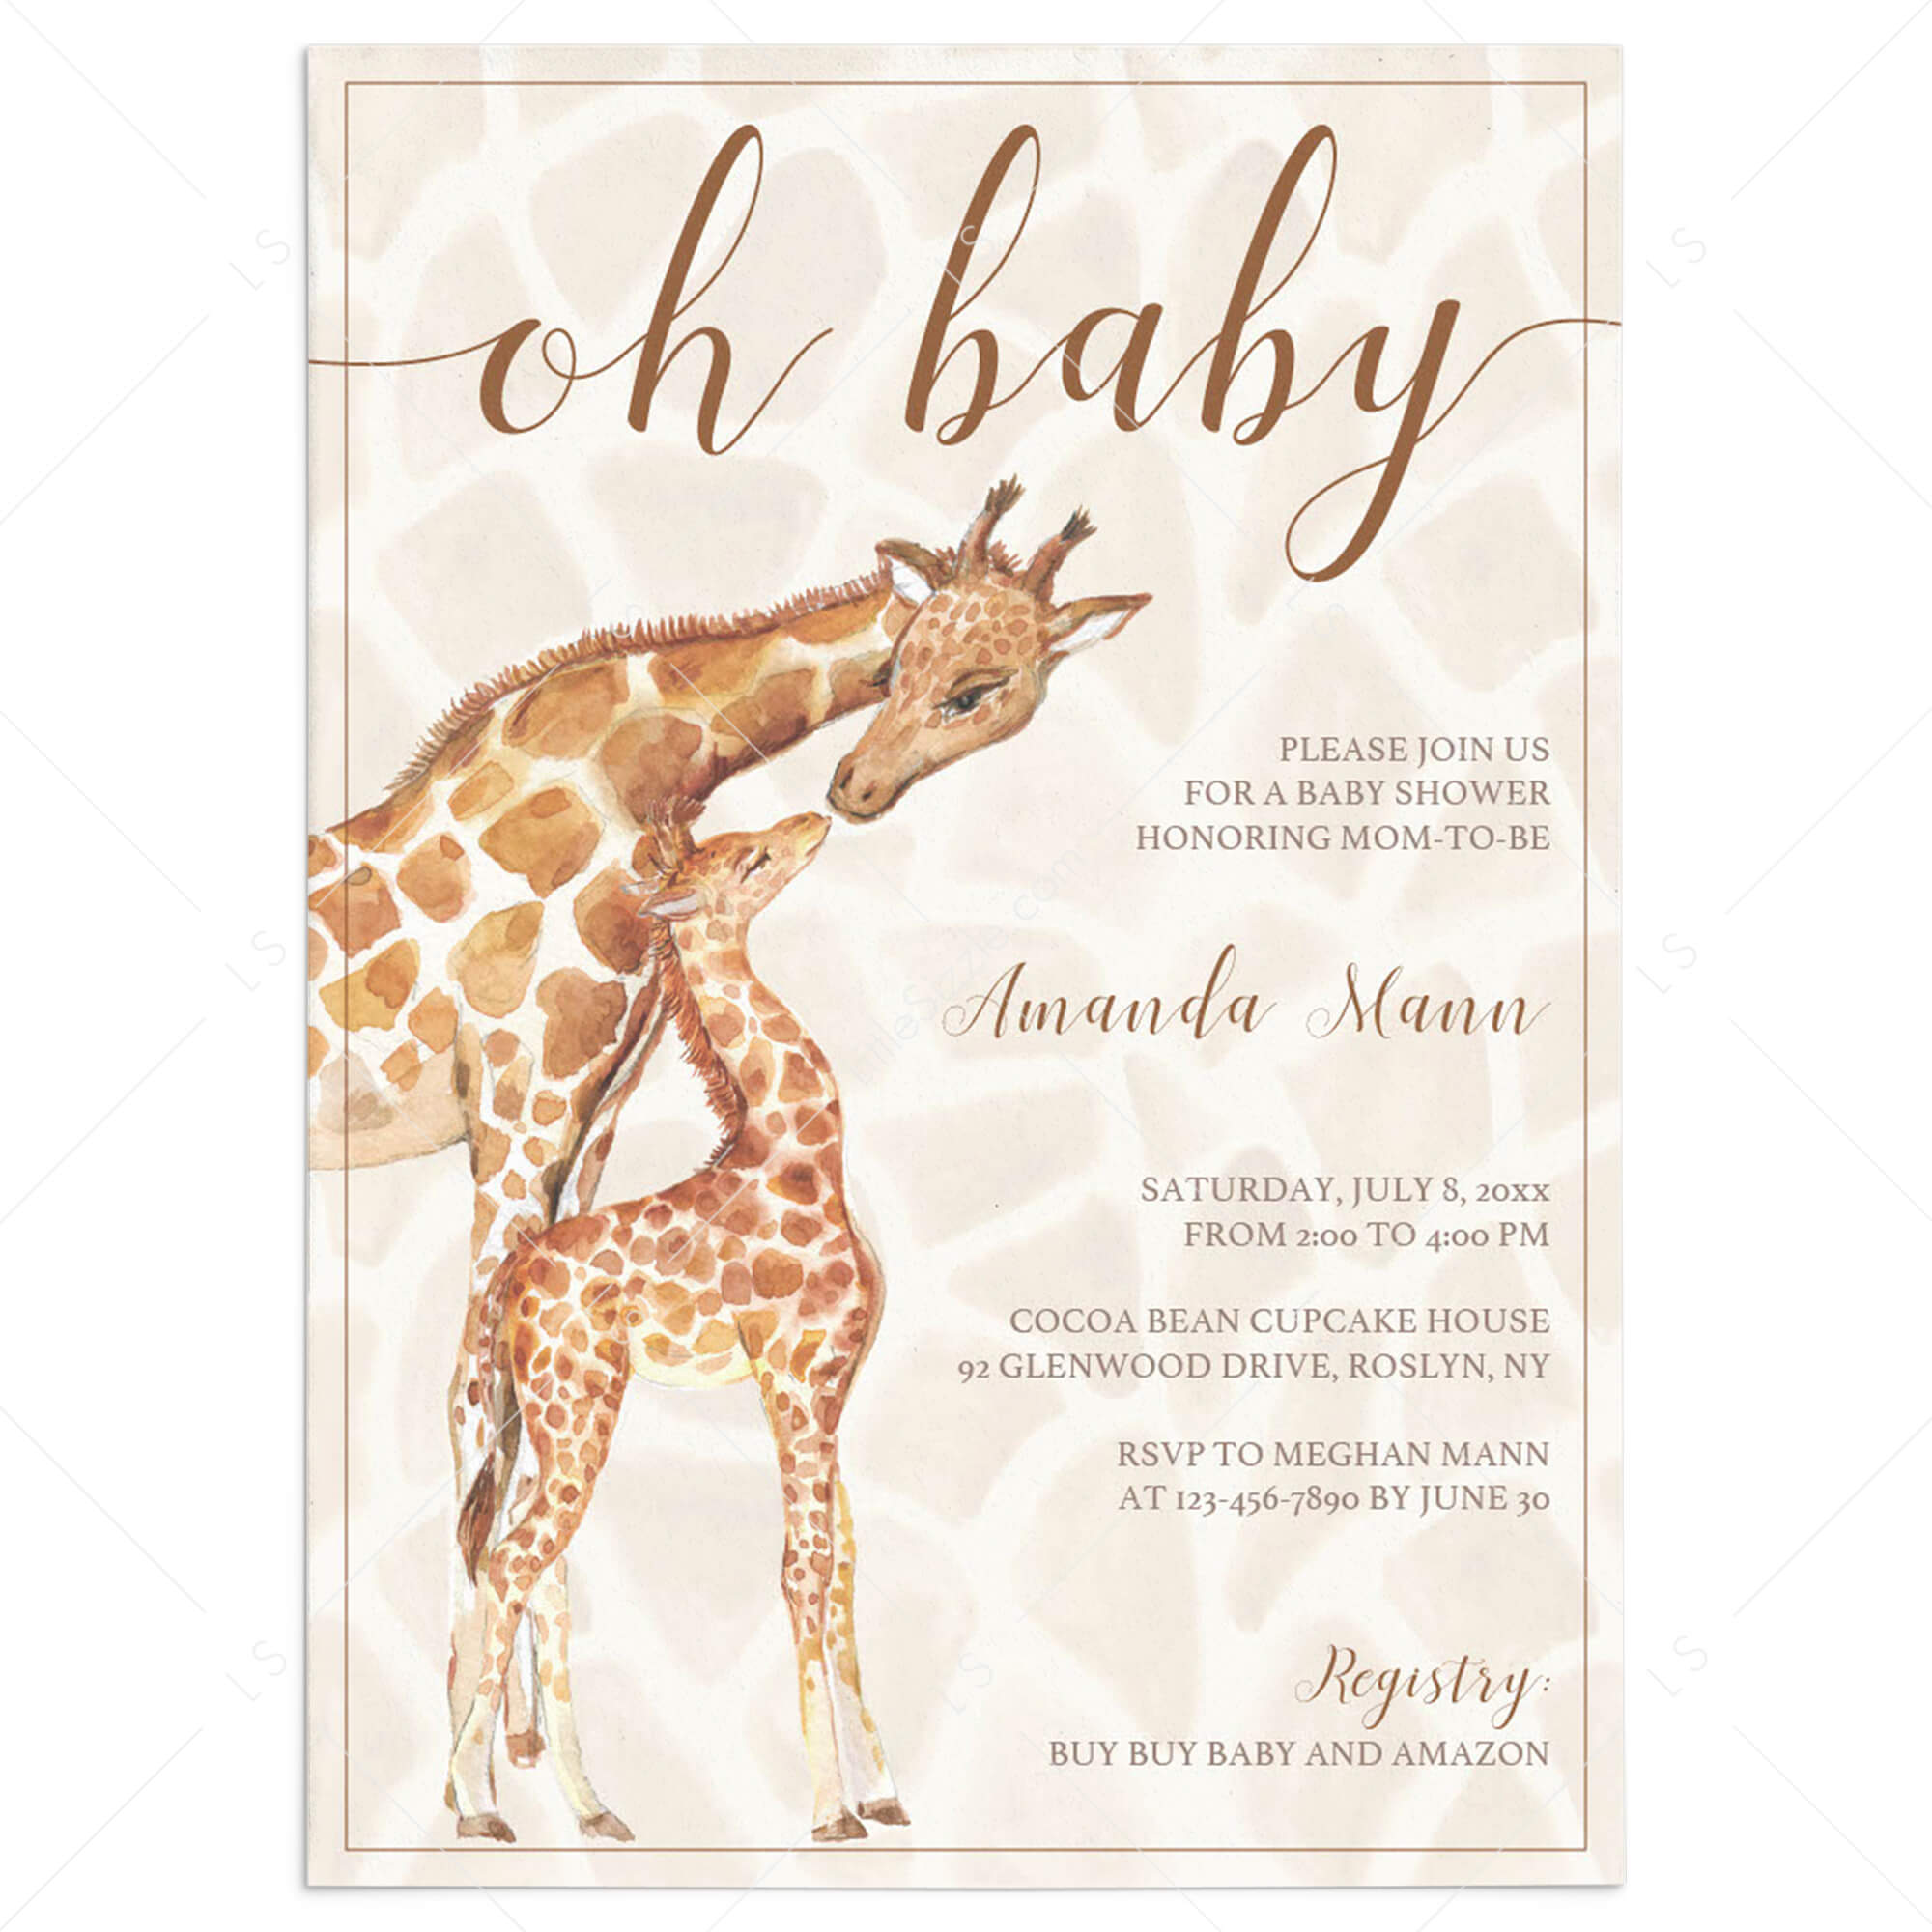 Oh Baby Baby Shower Invitation Template Giraffe Themed by LittleSizzle